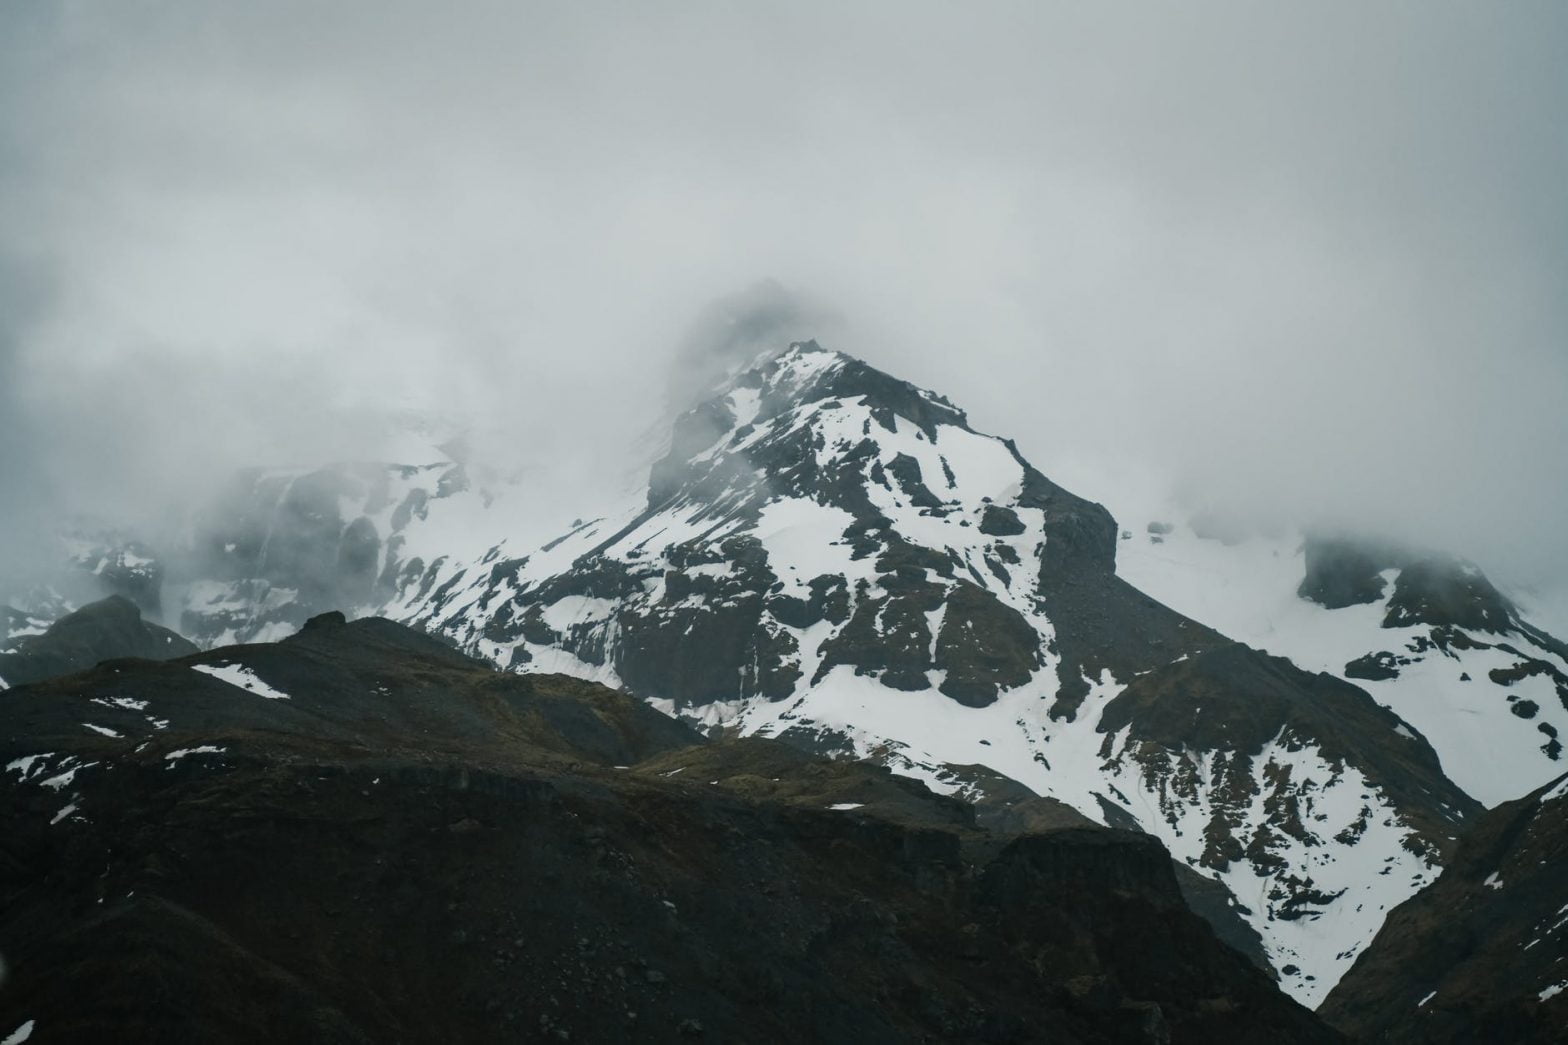 severe snowy mountains under thick clouds